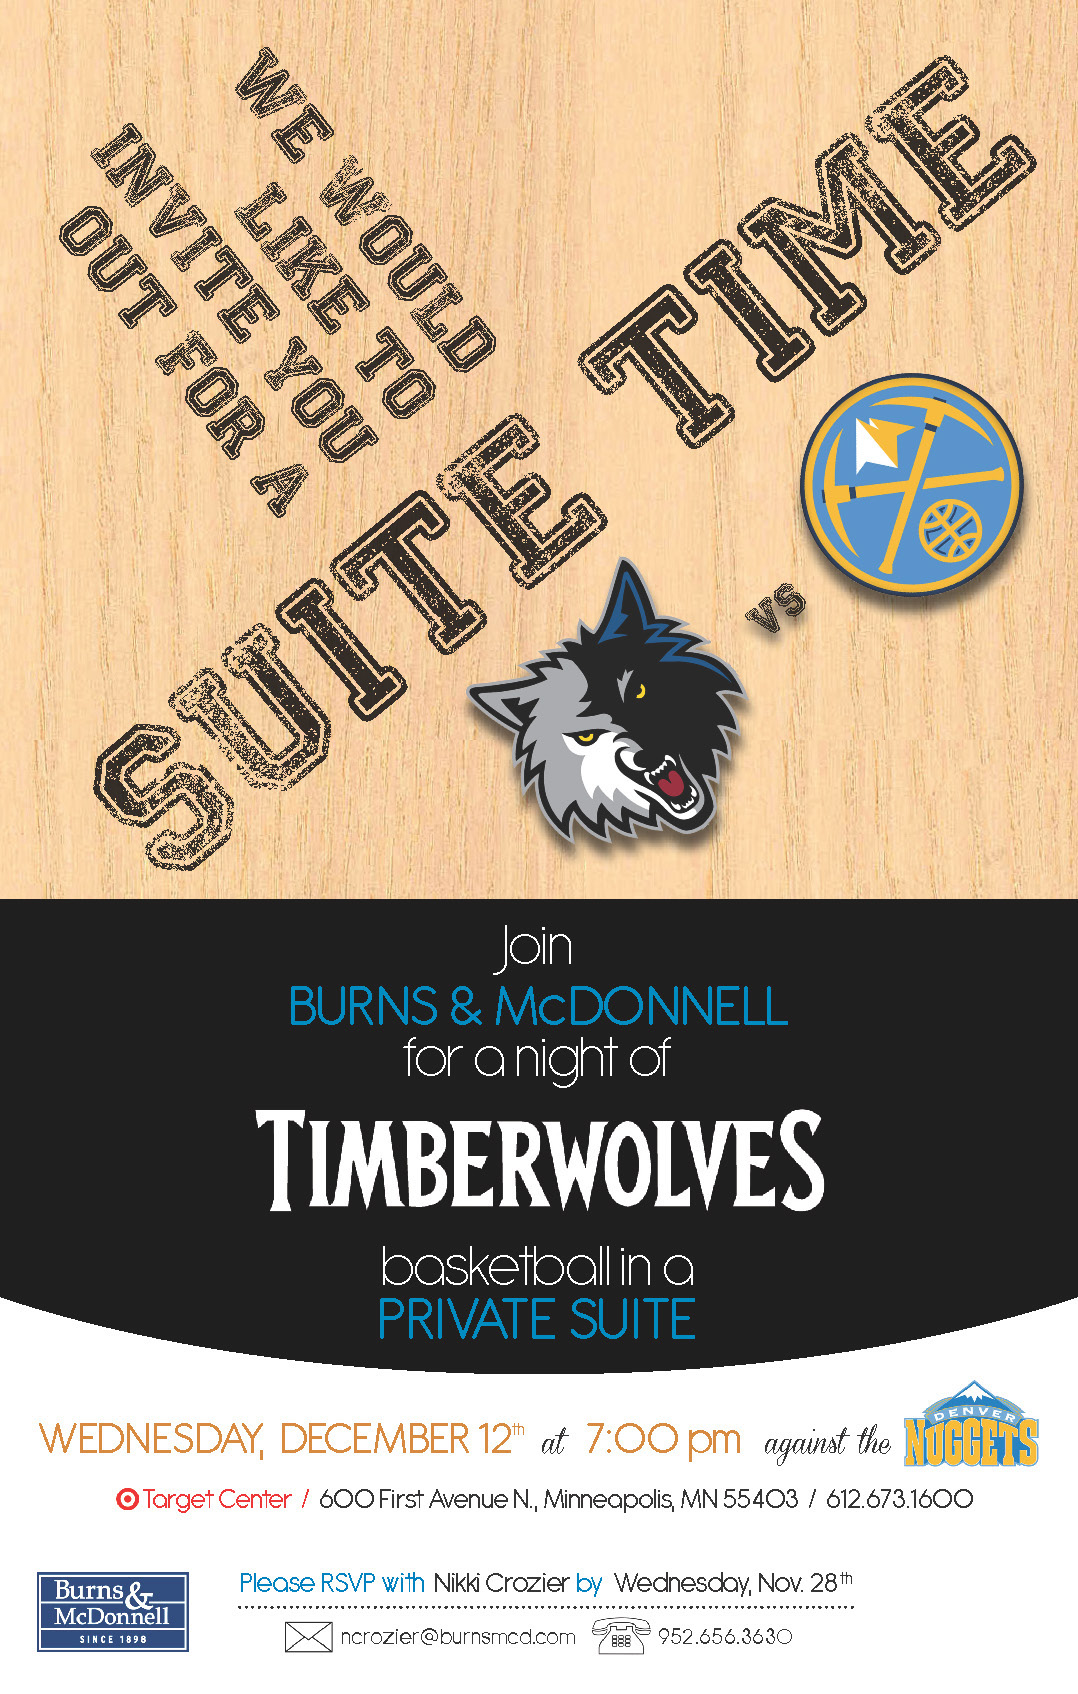 basketball clients Events timberwolves wolves denver Nuggets Colorado suite Consulting environmental construction burns McDonnell